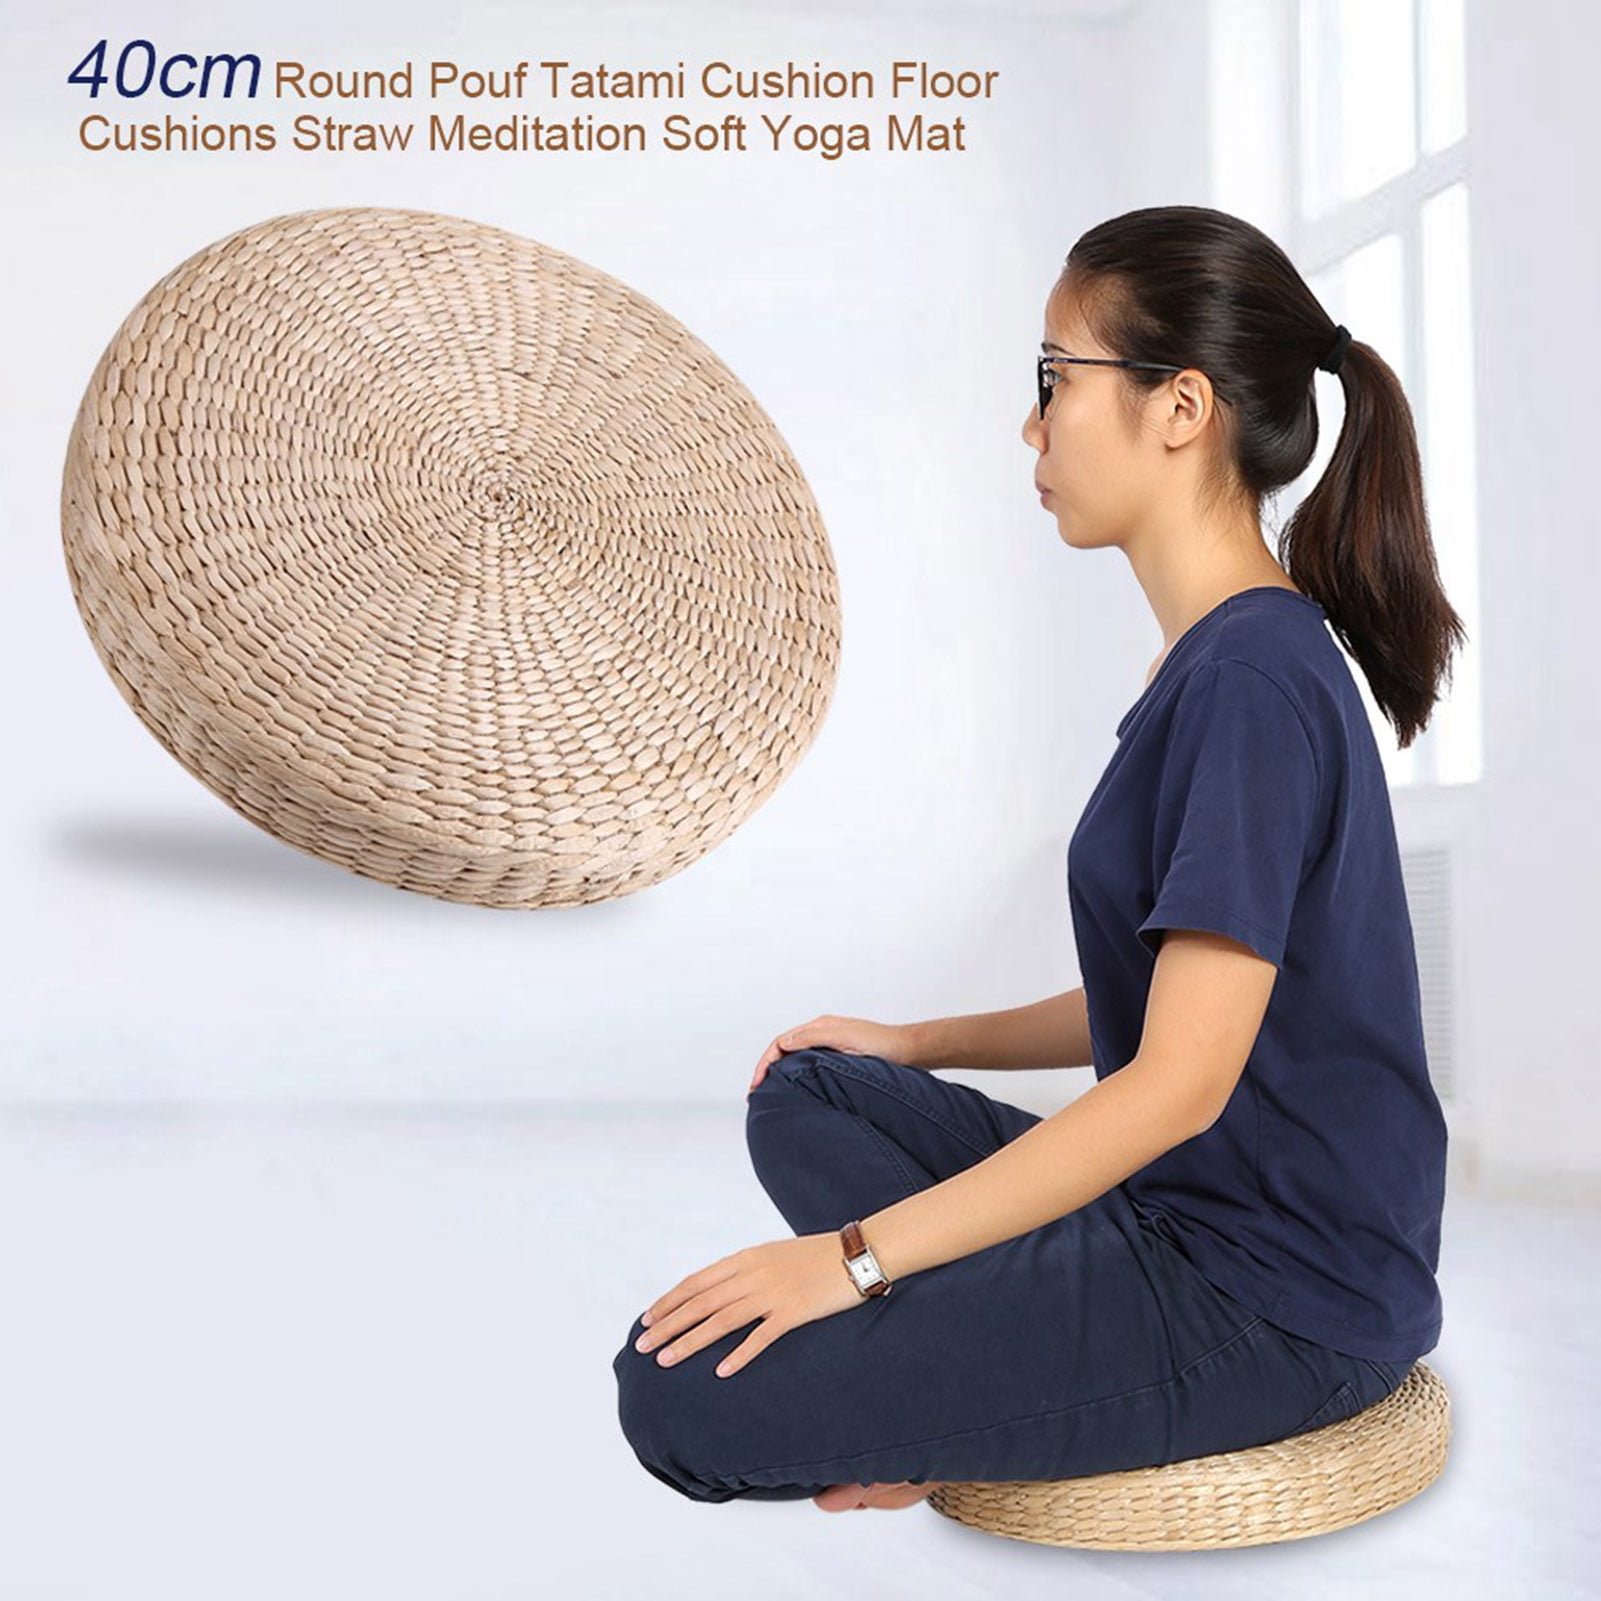 Cattail Hand‑Woven Pouf Tatami Seats Cushion Round Padded Room Floor Straw Mat for Zen Yoga Ceremony Balcony Bay Window Floor Decoration 15.7x15.7x2.4in